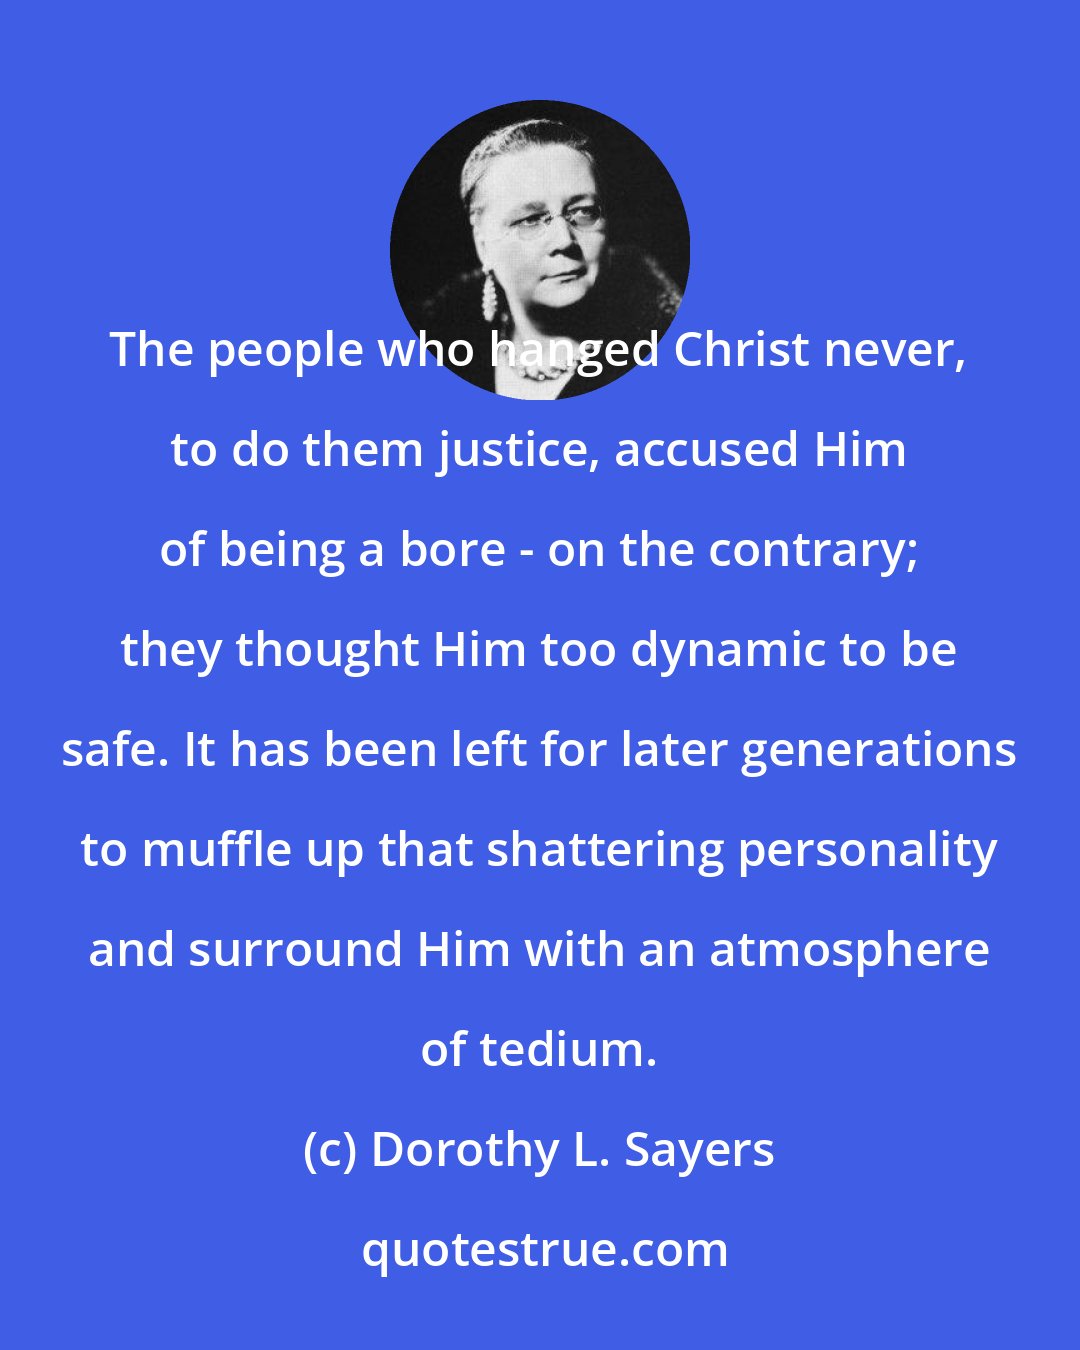 Dorothy L. Sayers: The people who hanged Christ never, to do them justice, accused Him of being a bore - on the contrary; they thought Him too dynamic to be safe. It has been left for later generations to muffle up that shattering personality and surround Him with an atmosphere of tedium.